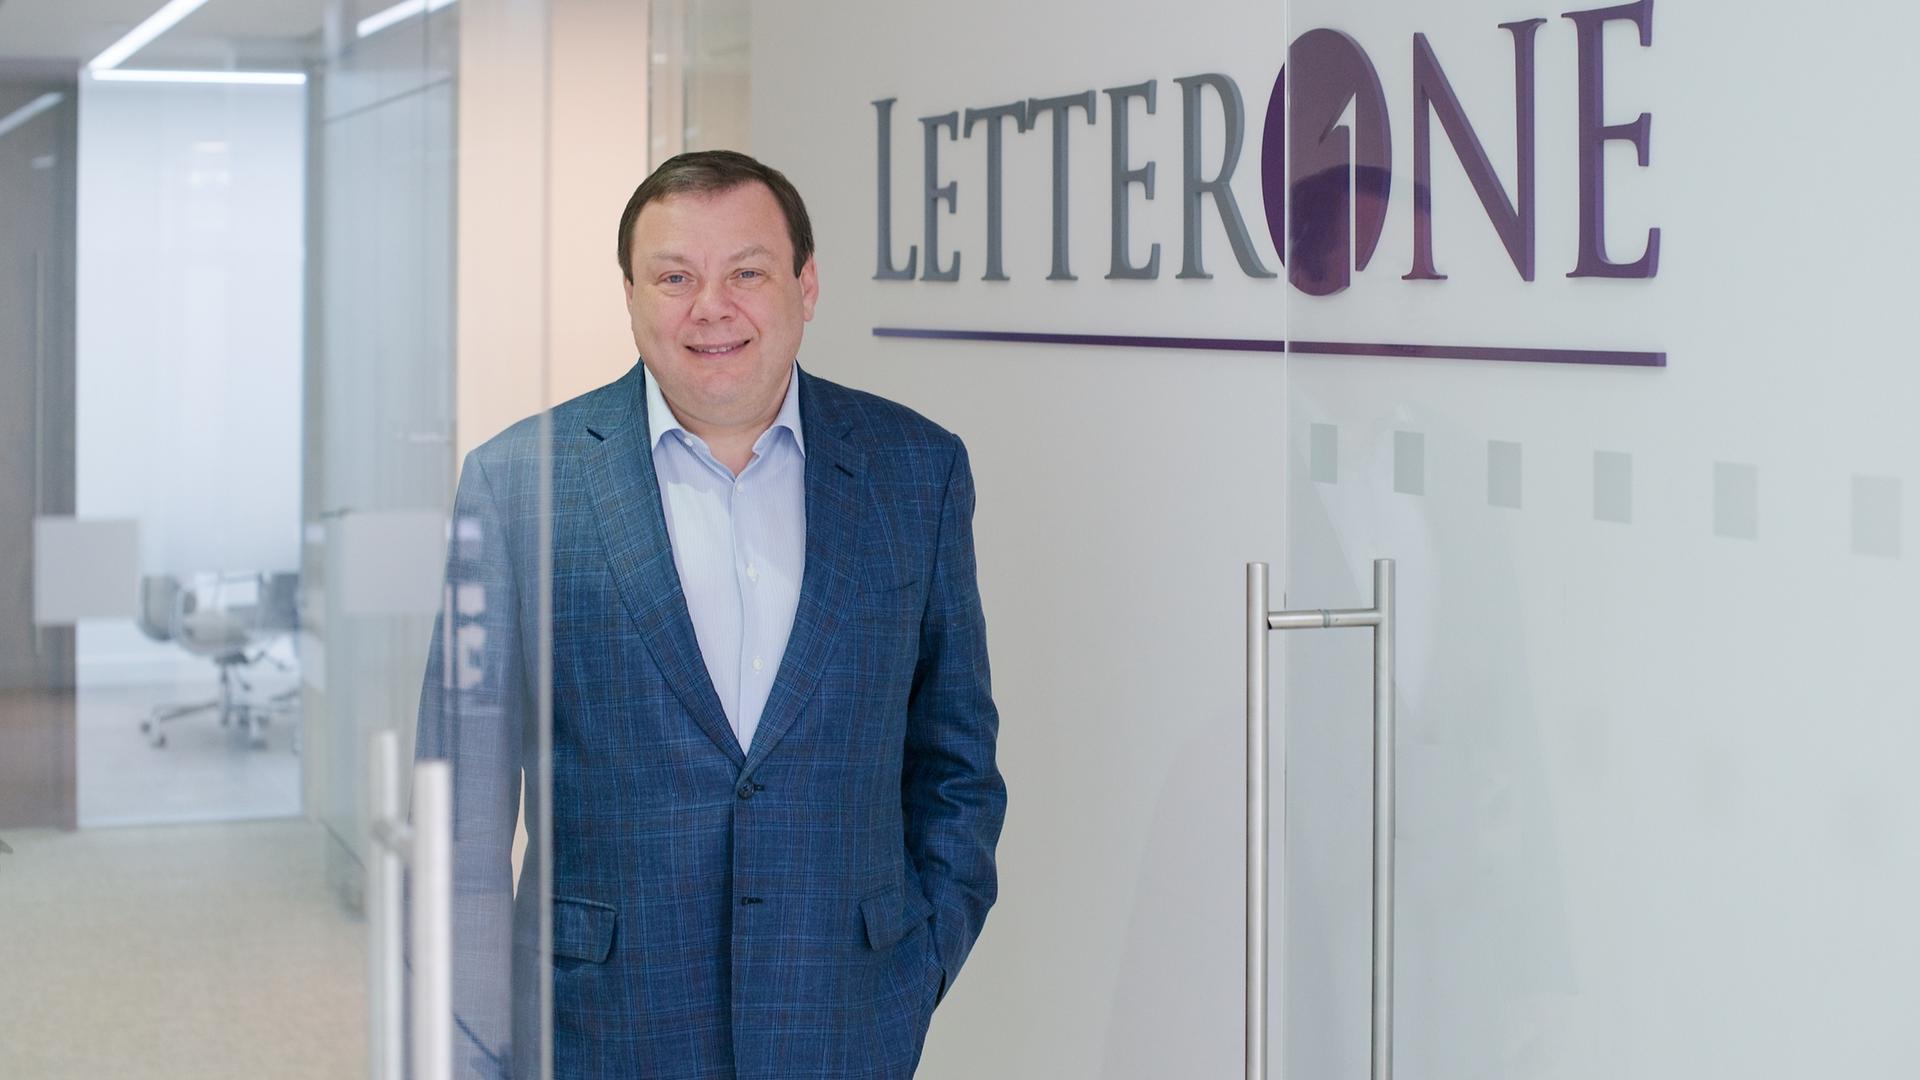 Russian billionaire Mikhail Fridman, now the target of EU sanctions, at the offices of his investment firm LetterOne in Luxembourg in 2016